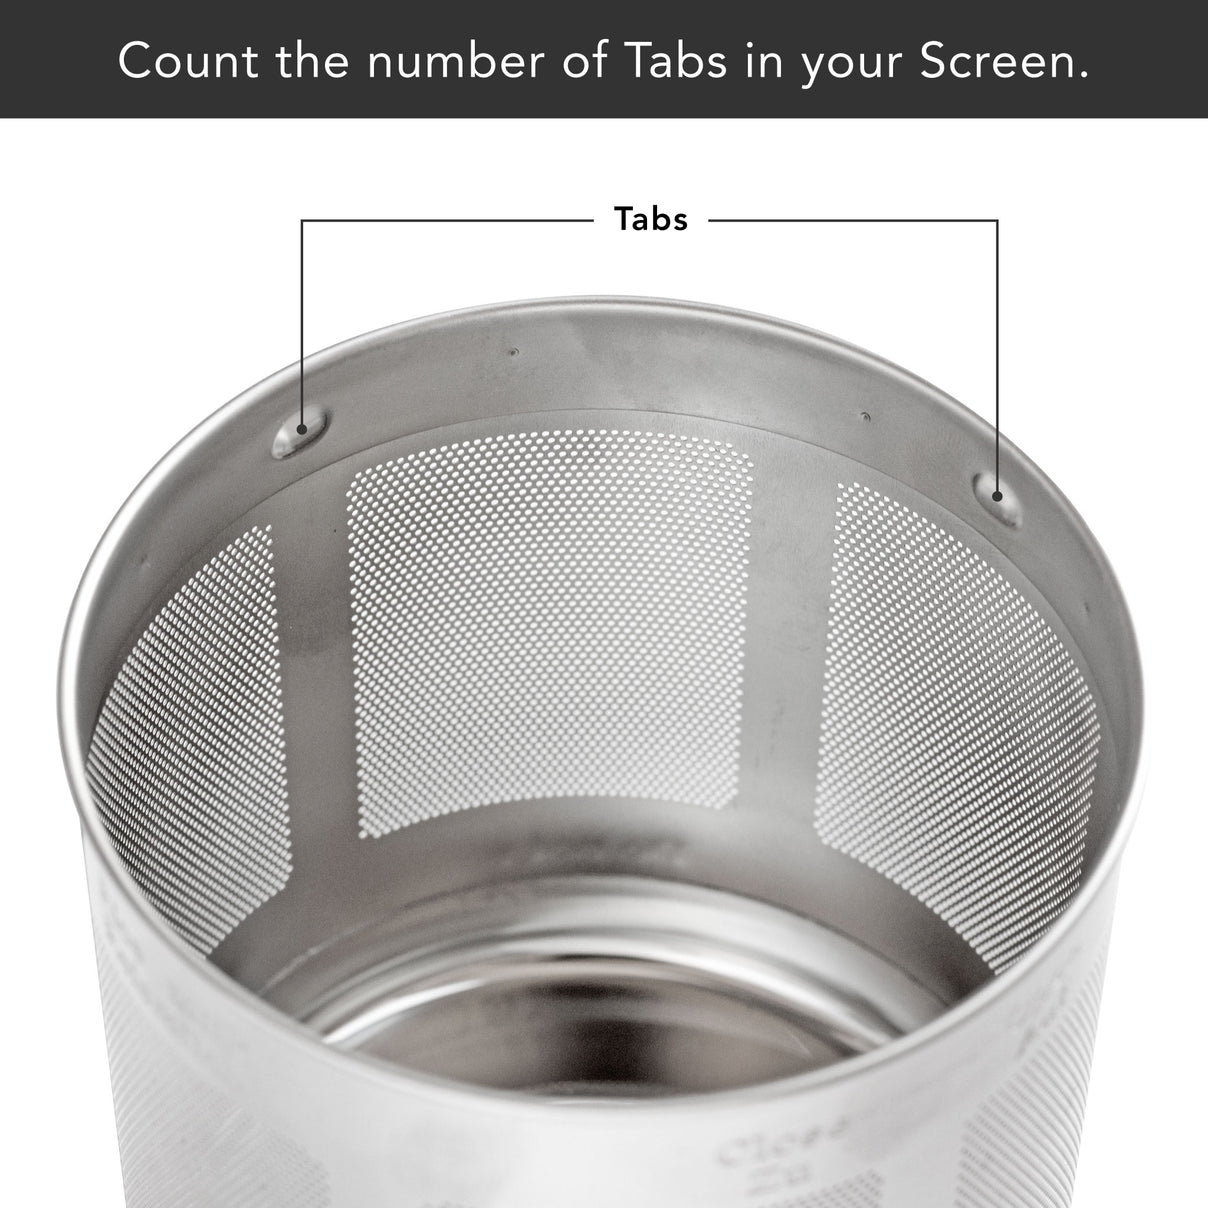 Soyabella® Coarse Screen or Paste Screen - Number of Tabs in Screen